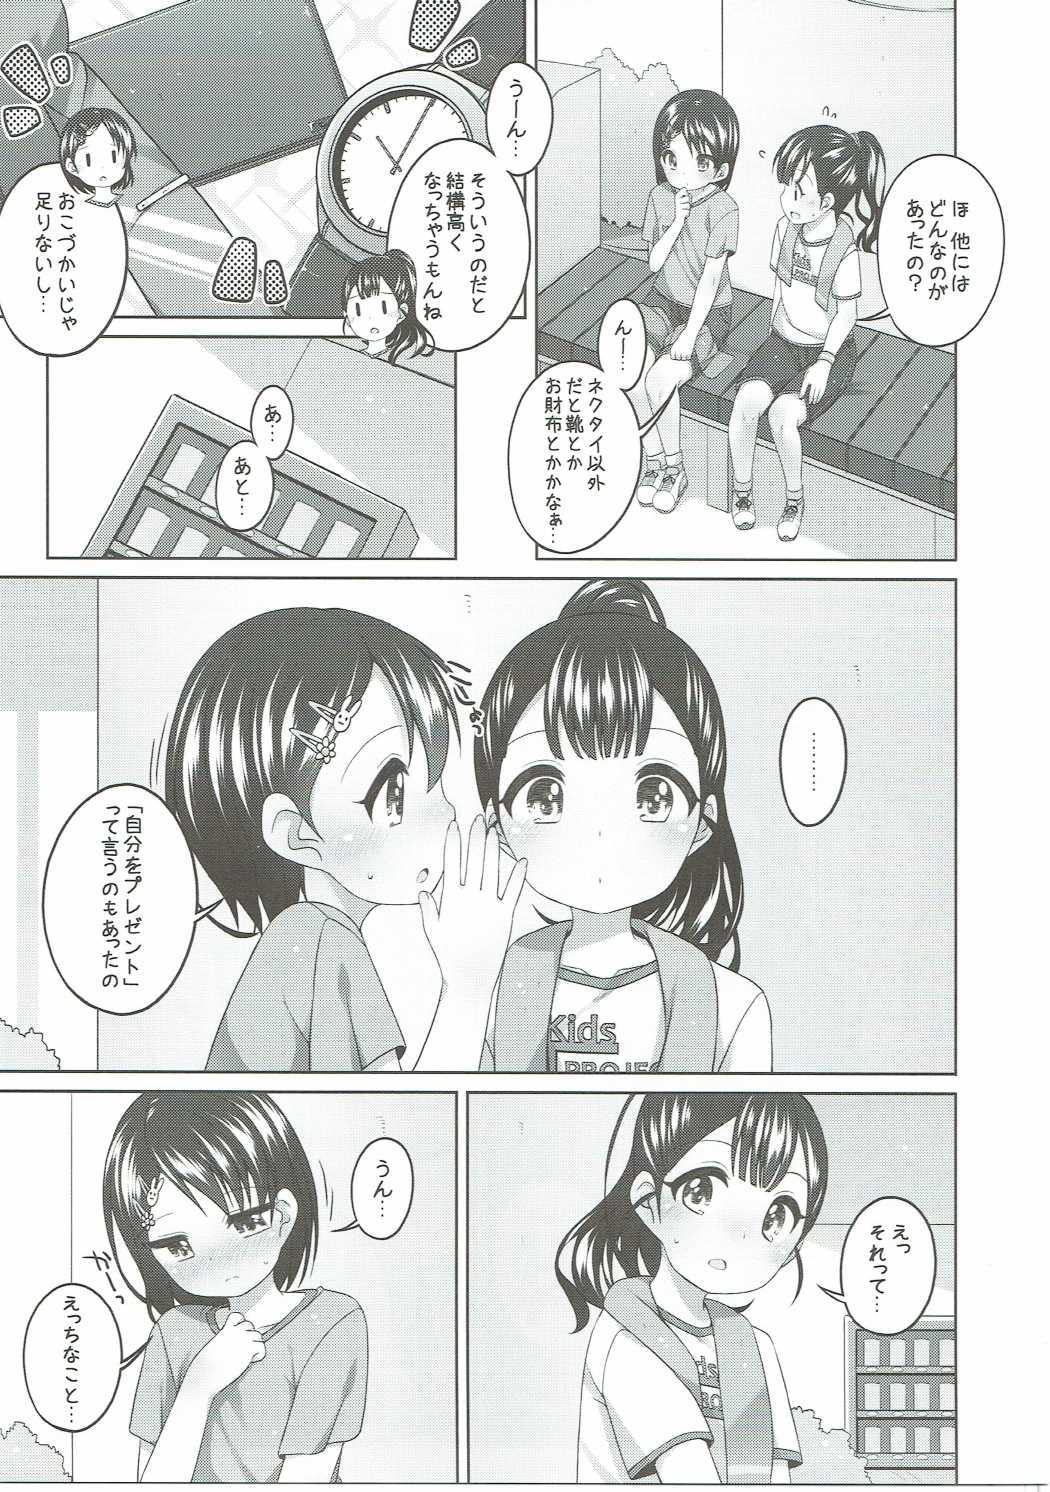 Bwc Ganbare! Chie-chan - The idolmaster Chica - Page 6